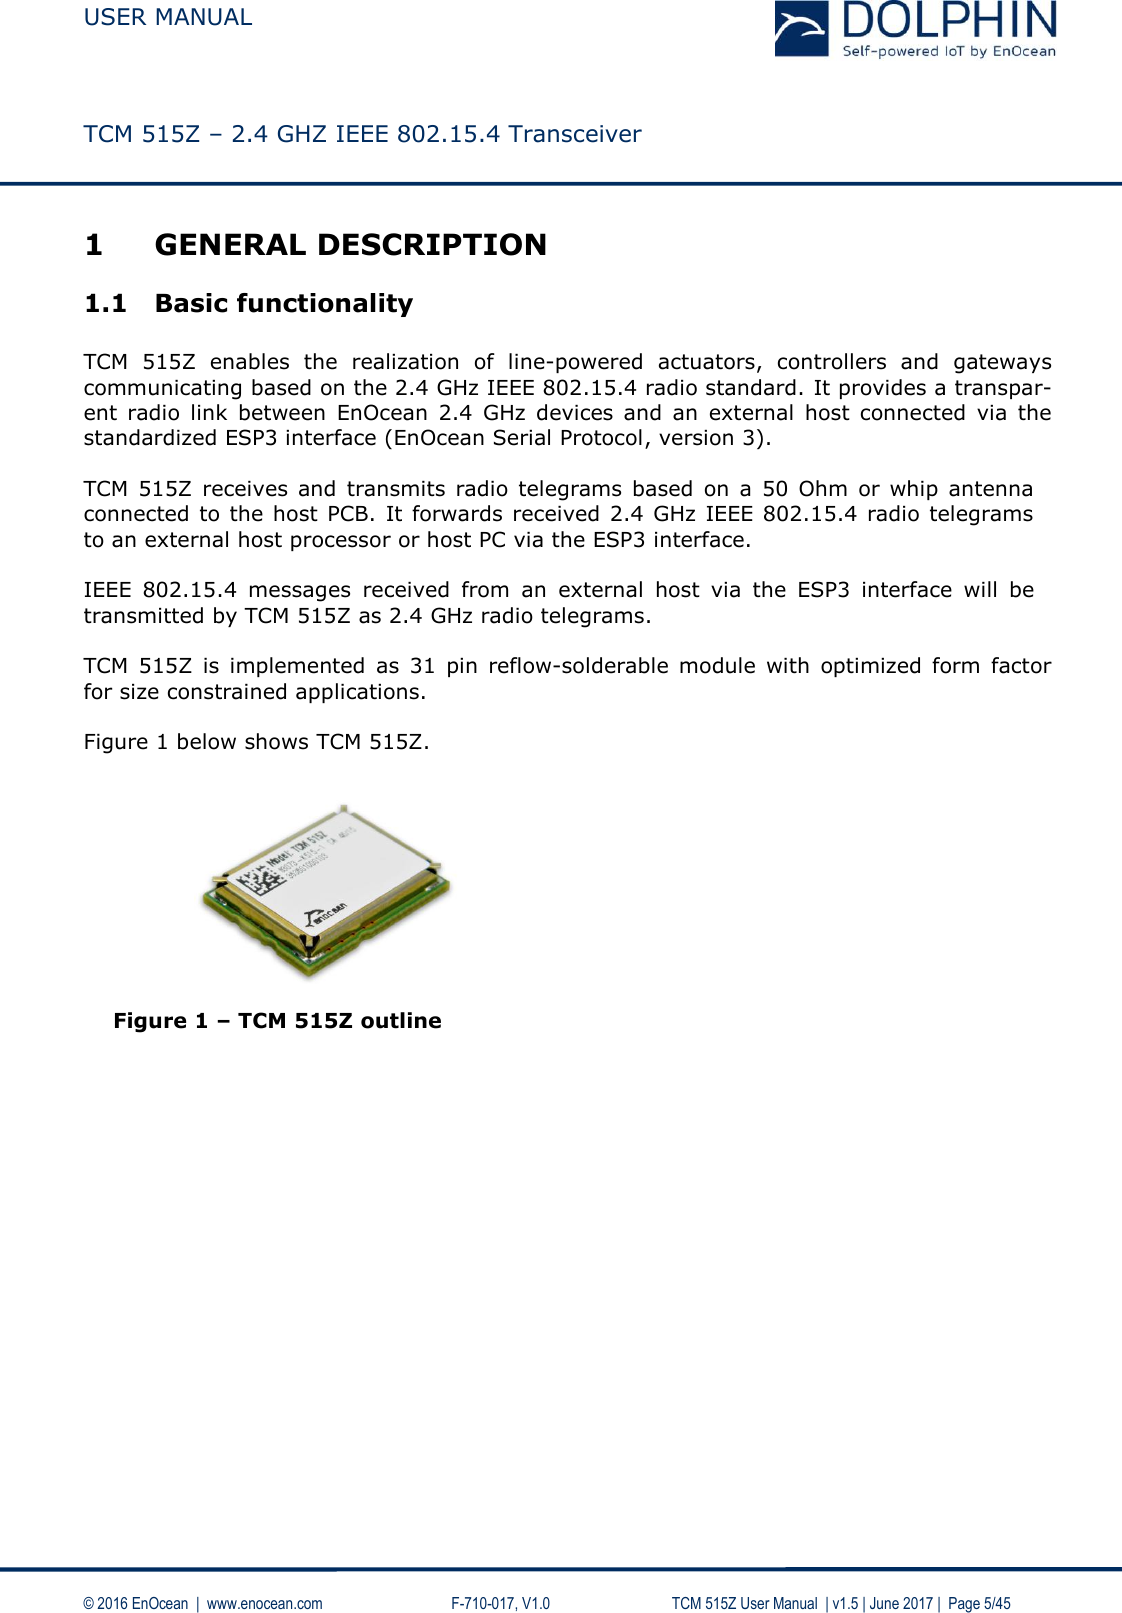  USER MANUAL    TCM 515Z – 2.4 GHZ IEEE 802.15.4 Transceiver   © 2016 EnOcean  |  www.enocean.com     F-710-017, V1.0        TCM 515Z User Manual  | v1.5 | June 2017 |  Page 5/45 1 GENERAL DESCRIPTION 1.1 Basic functionality  TCM  515Z  enables  the  realization  of  line-powered  actuators,  controllers  and  gateways communicating based on the 2.4 GHz IEEE 802.15.4 radio standard. It provides a transpar-ent  radio  link  between  EnOcean  2.4  GHz  devices  and  an  external  host  connected  via  the standardized ESP3 interface (EnOcean Serial Protocol, version 3).  TCM  515Z receives and transmits radio telegrams  based  on  a  50  Ohm  or  whip  antenna connected to the host PCB. It forwards received 2.4 GHz IEEE 802.15.4 radio telegrams to an external host processor or host PC via the ESP3 interface.  IEEE  802.15.4  messages  received  from  an  external  host  via  the  ESP3  interface  will  be transmitted by TCM 515Z as 2.4 GHz radio telegrams.  TCM  515Z  is implemented  as  31  pin  reflow-solderable  module  with  optimized  form  factor for size constrained applications.   Figure 1 below shows TCM 515Z.           Figure 1 – TCM 515Z outline    